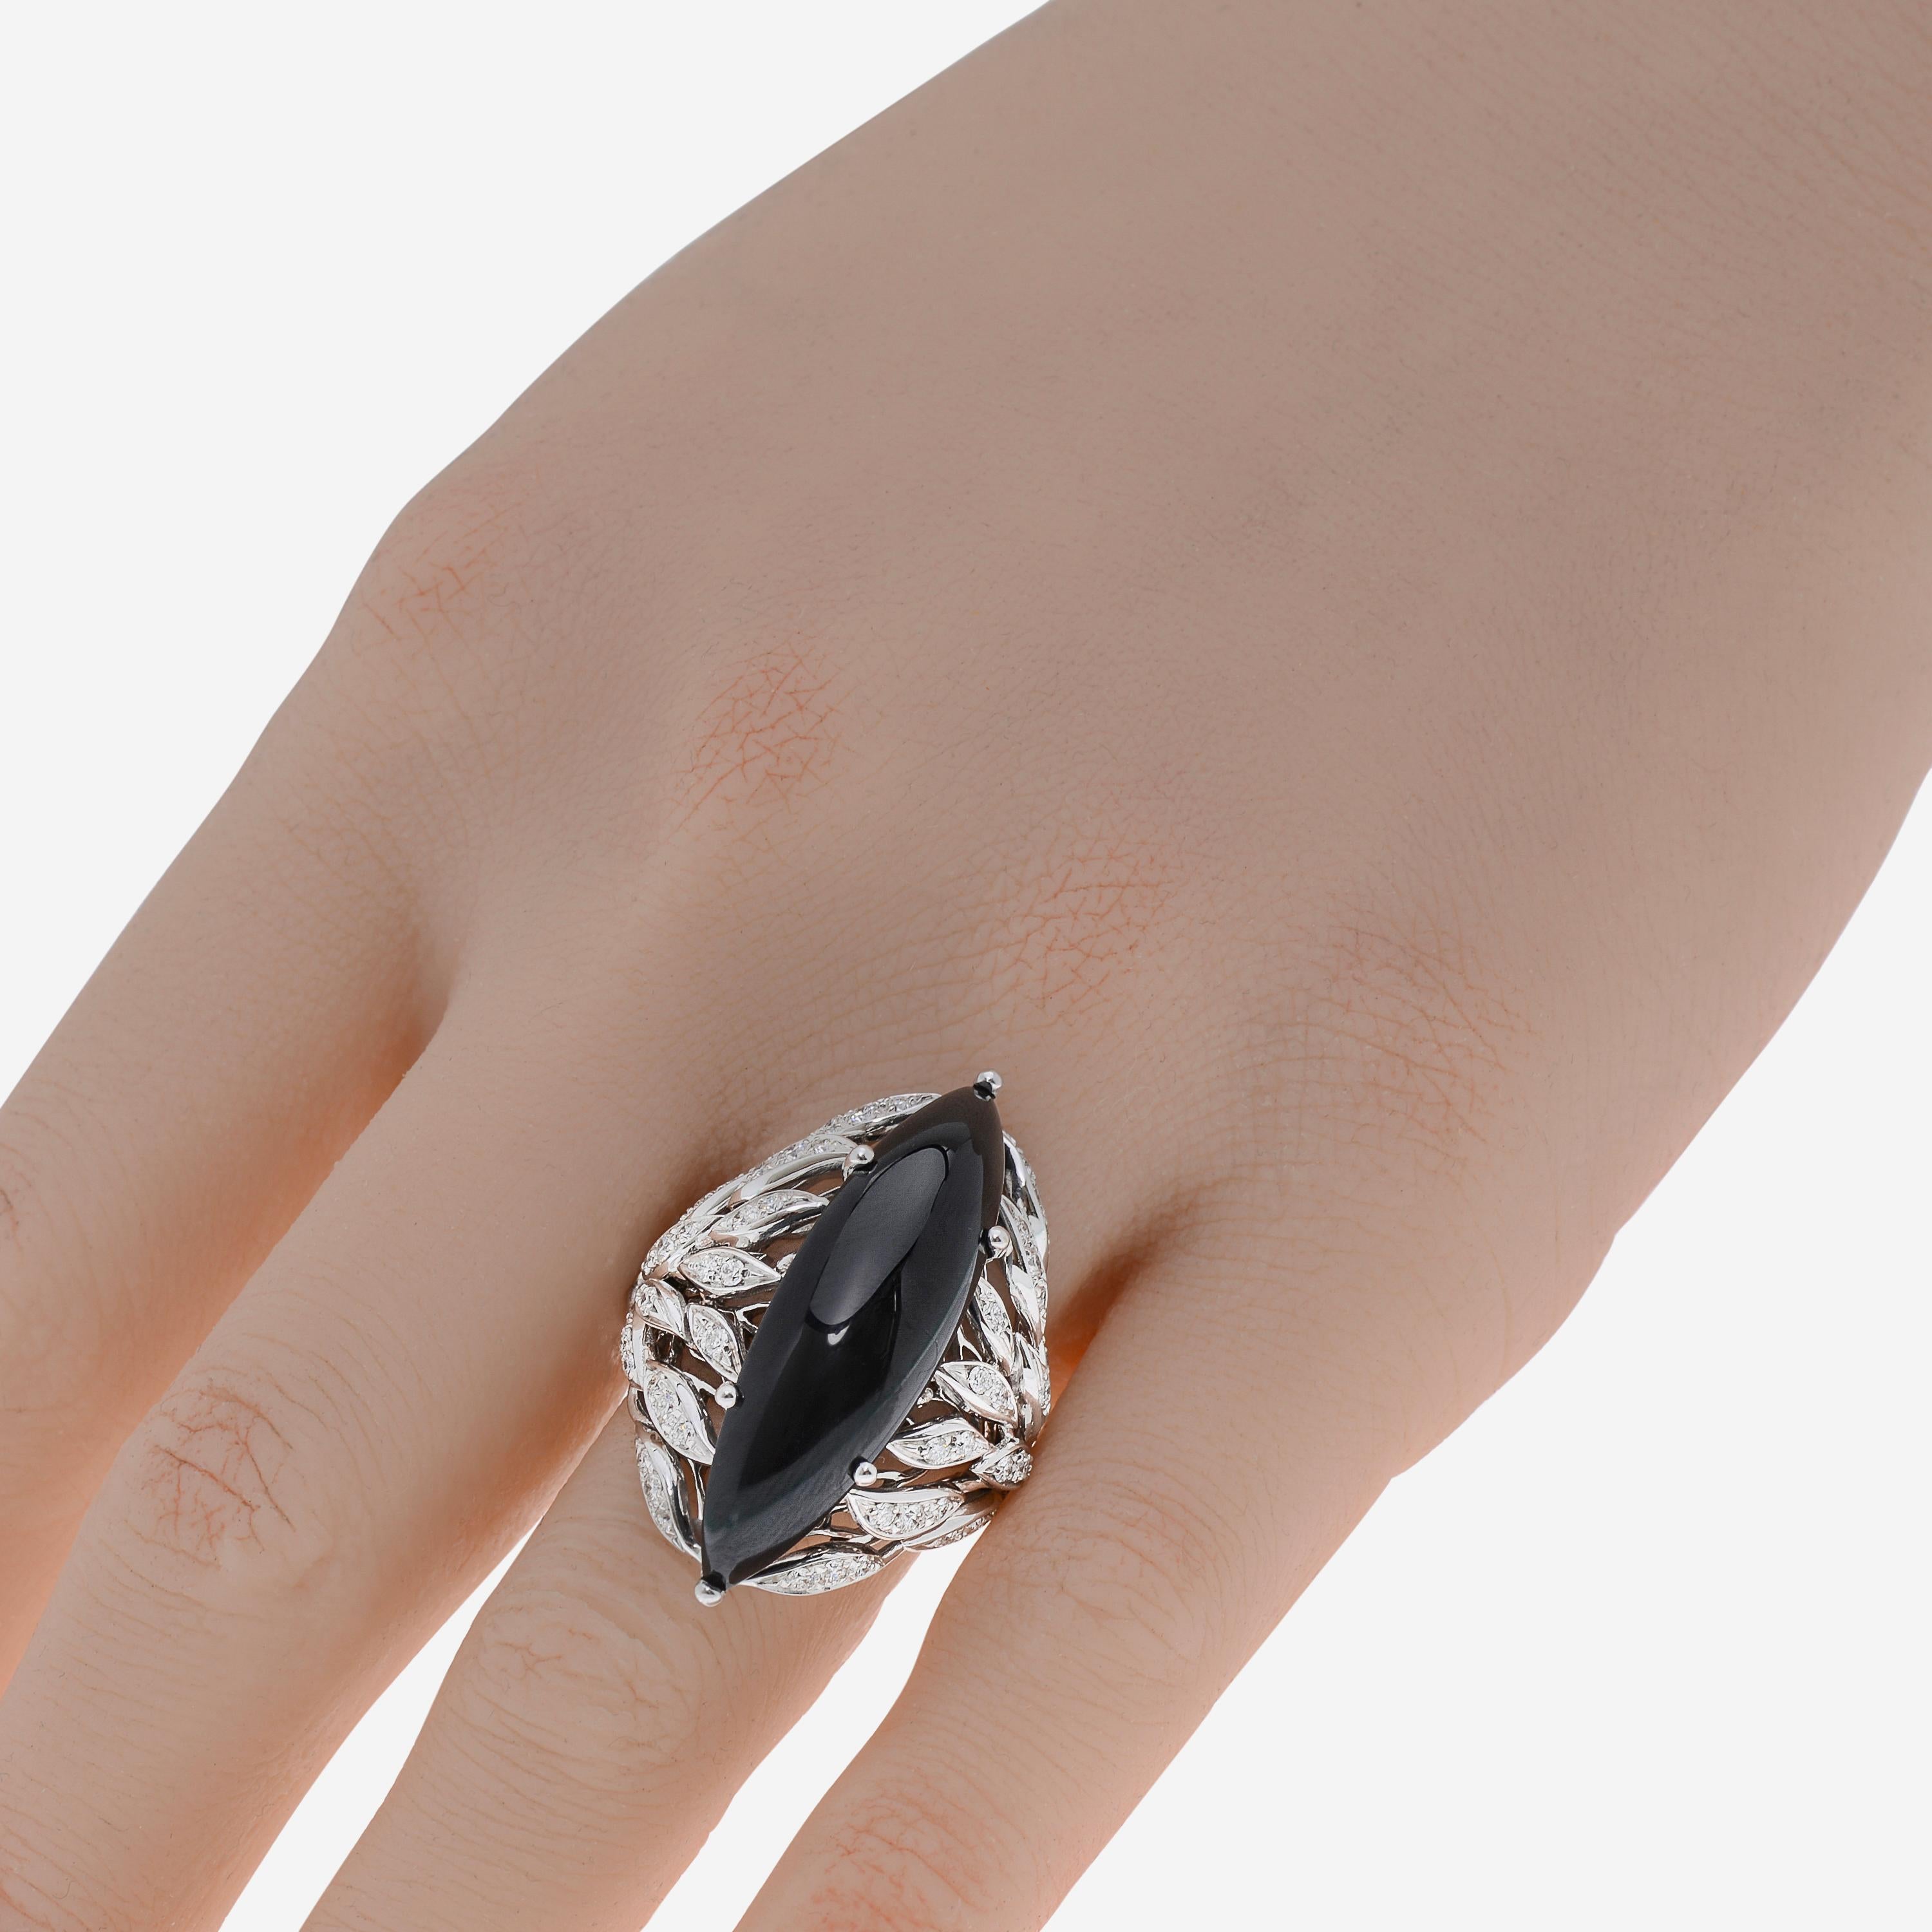 This adventurous Luca Carati 18K White Gold Cocktail Ring features glittering 0.78ct. tw. accent diamonds adorning a center of Onyx. The ring size is 6.75 (53.8). The Band Width is 3.5mm. The Weight is 13.4g.
